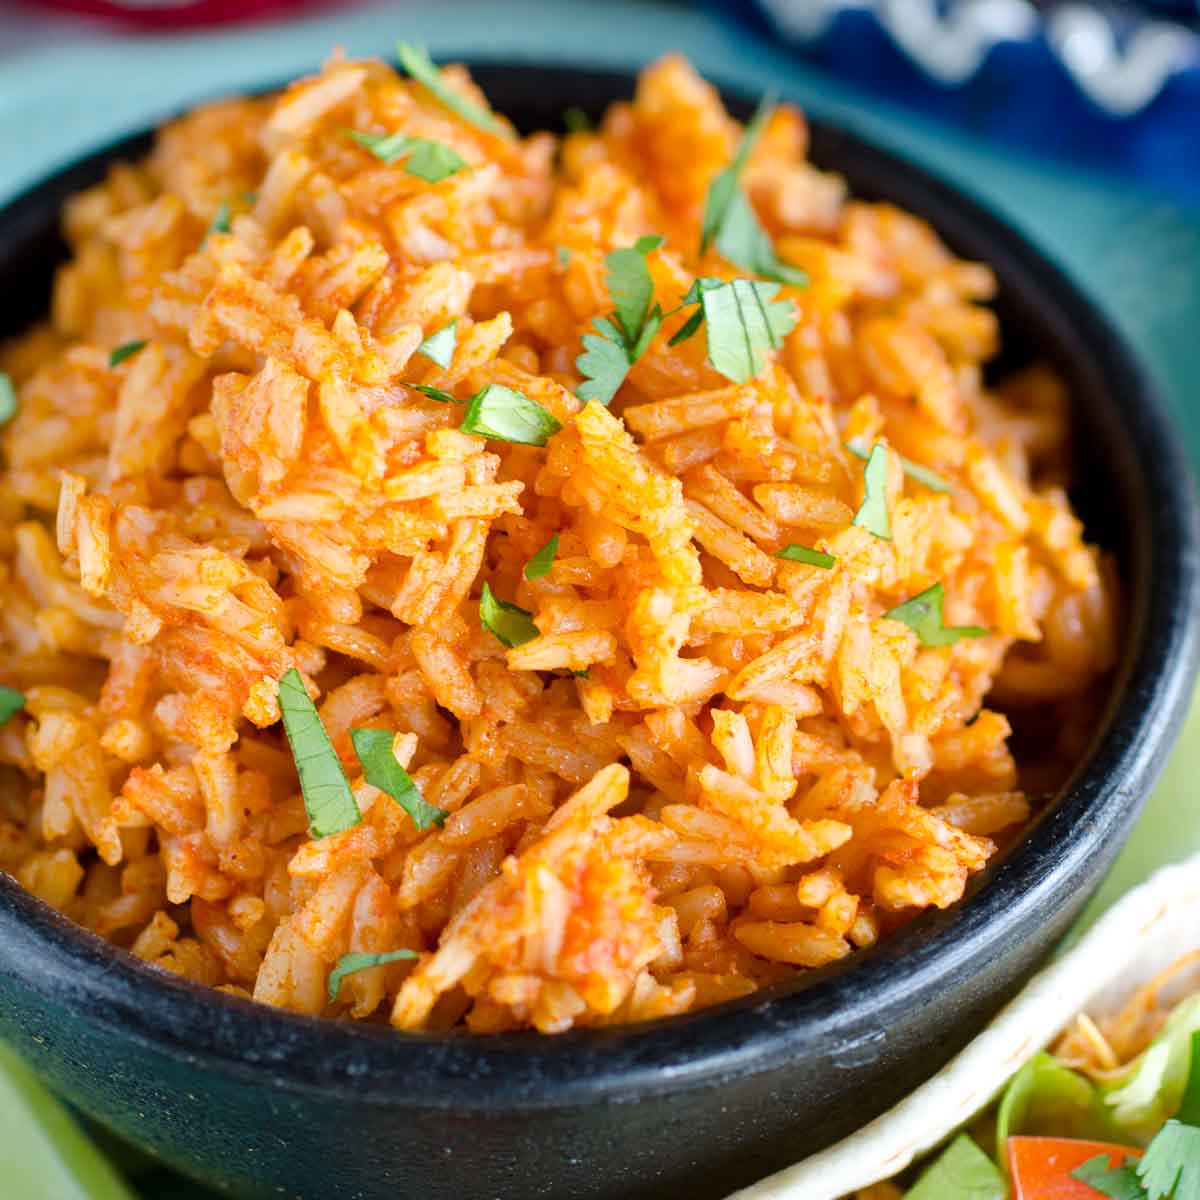 How to Make Mexican Rice Recipe for all your Tex-Mex meals!